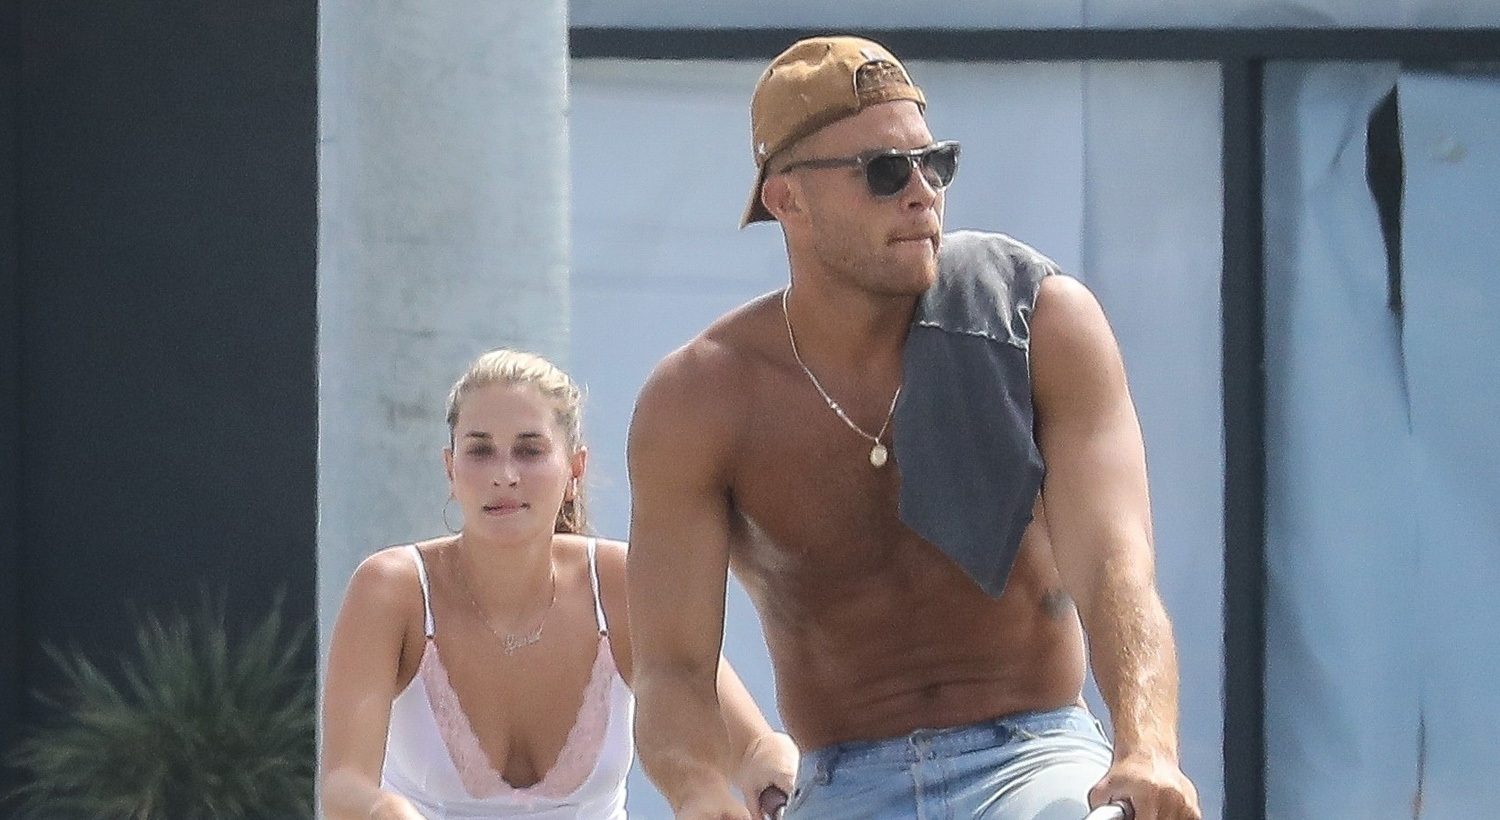 Blake Griffin Goes for a Shirtless Bike Ride with Francesca Aiello.